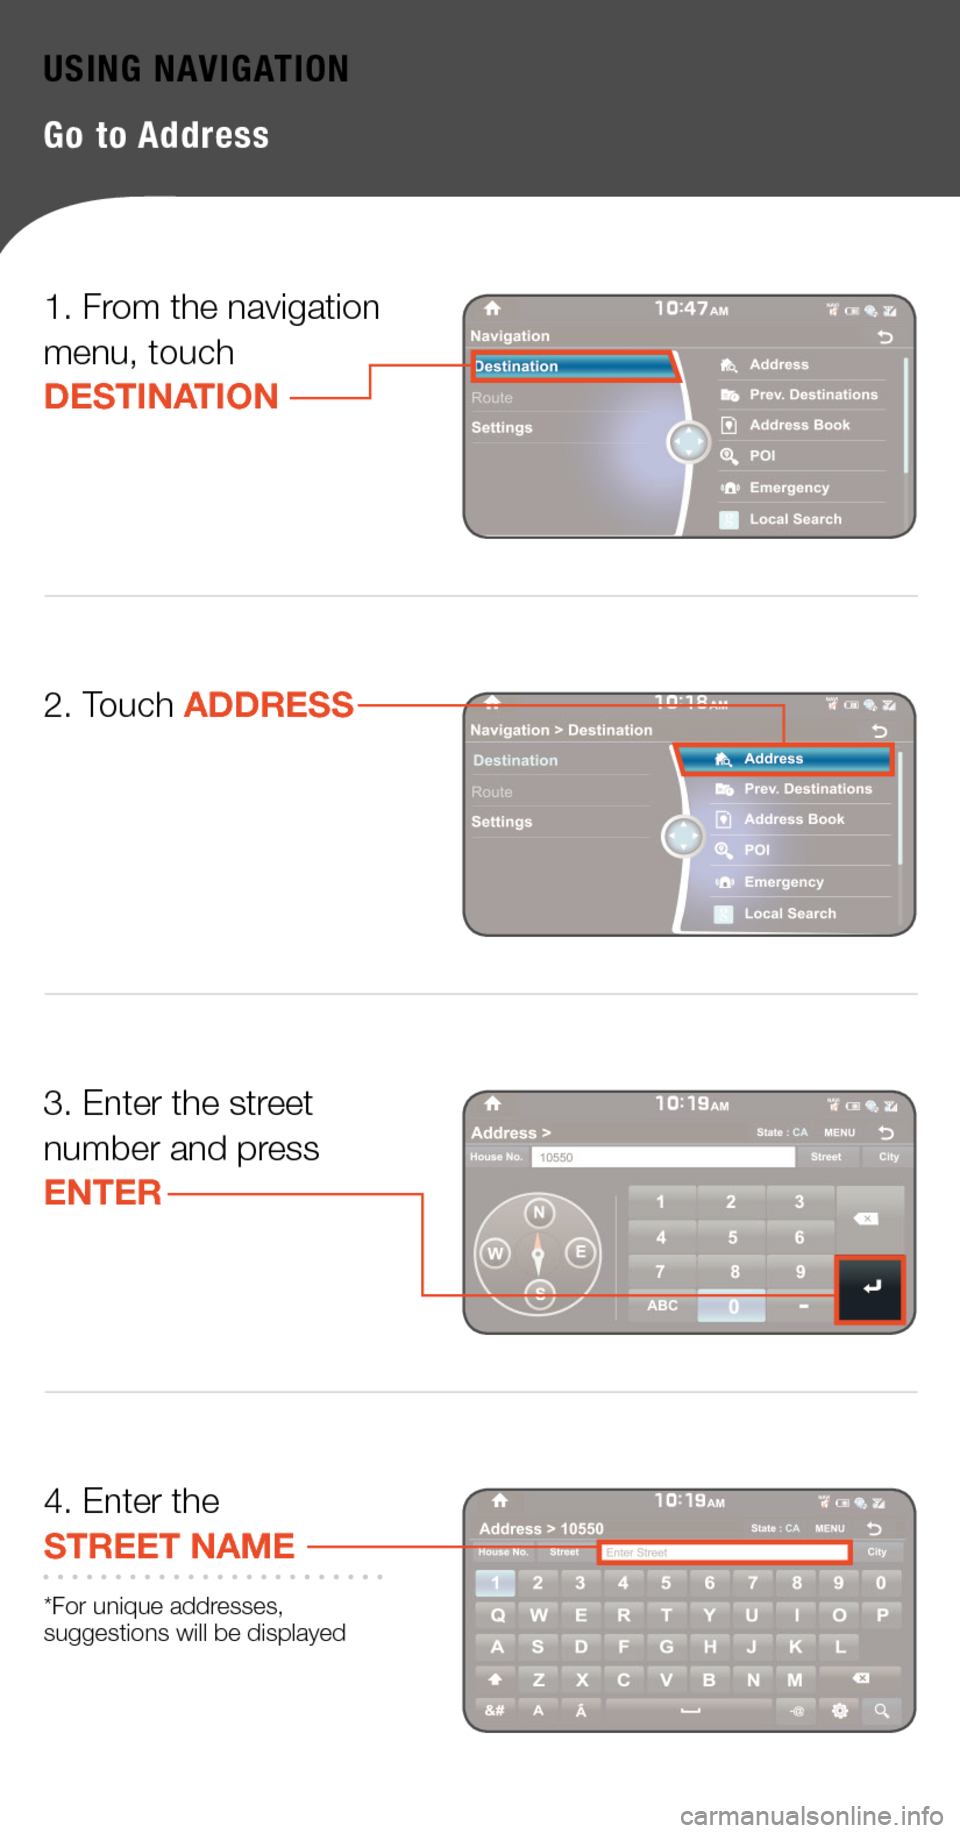 Hyundai Genesis 2015  Quick Tips USING NAVIGATION
Go to Address 
1. From the navigation menu, touch DESTINATION
3. Enter the street number and press  ENTER
4. Enter the STREET NAME
*For unique addresses, suggestions will be displayed